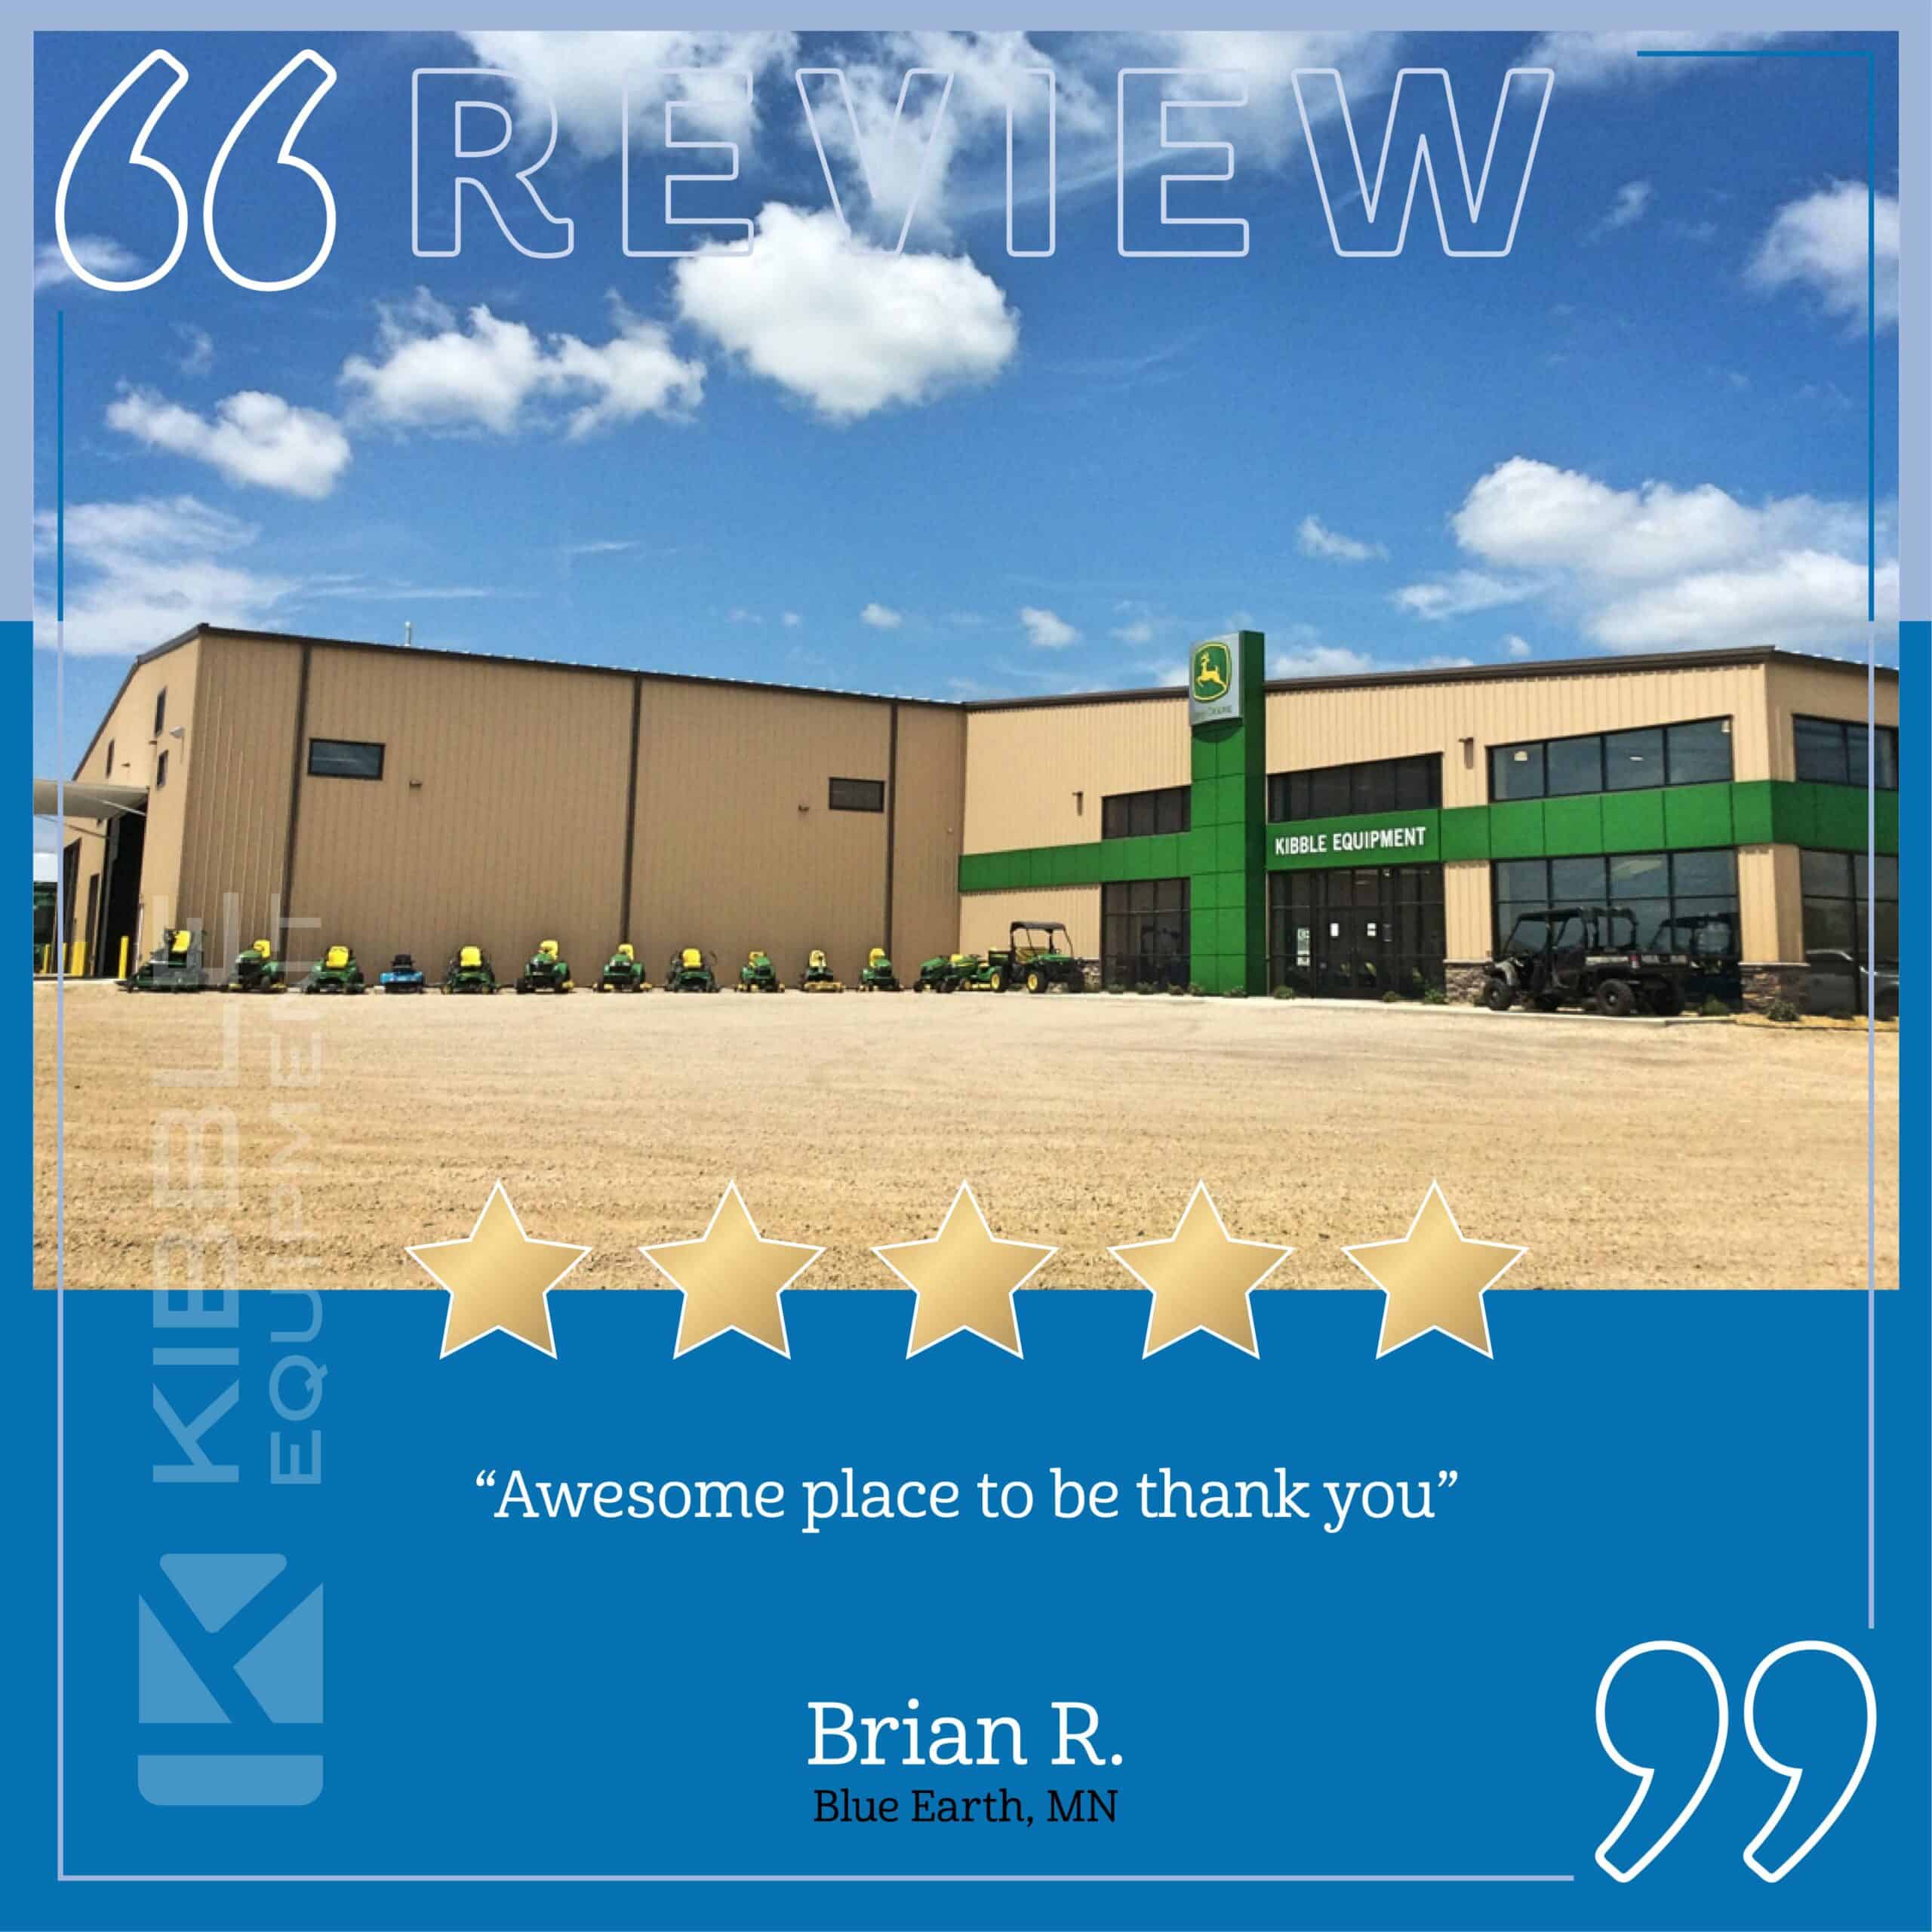 "Awesome place to be! Thank you!" Brian R. from Blue Earth, MN